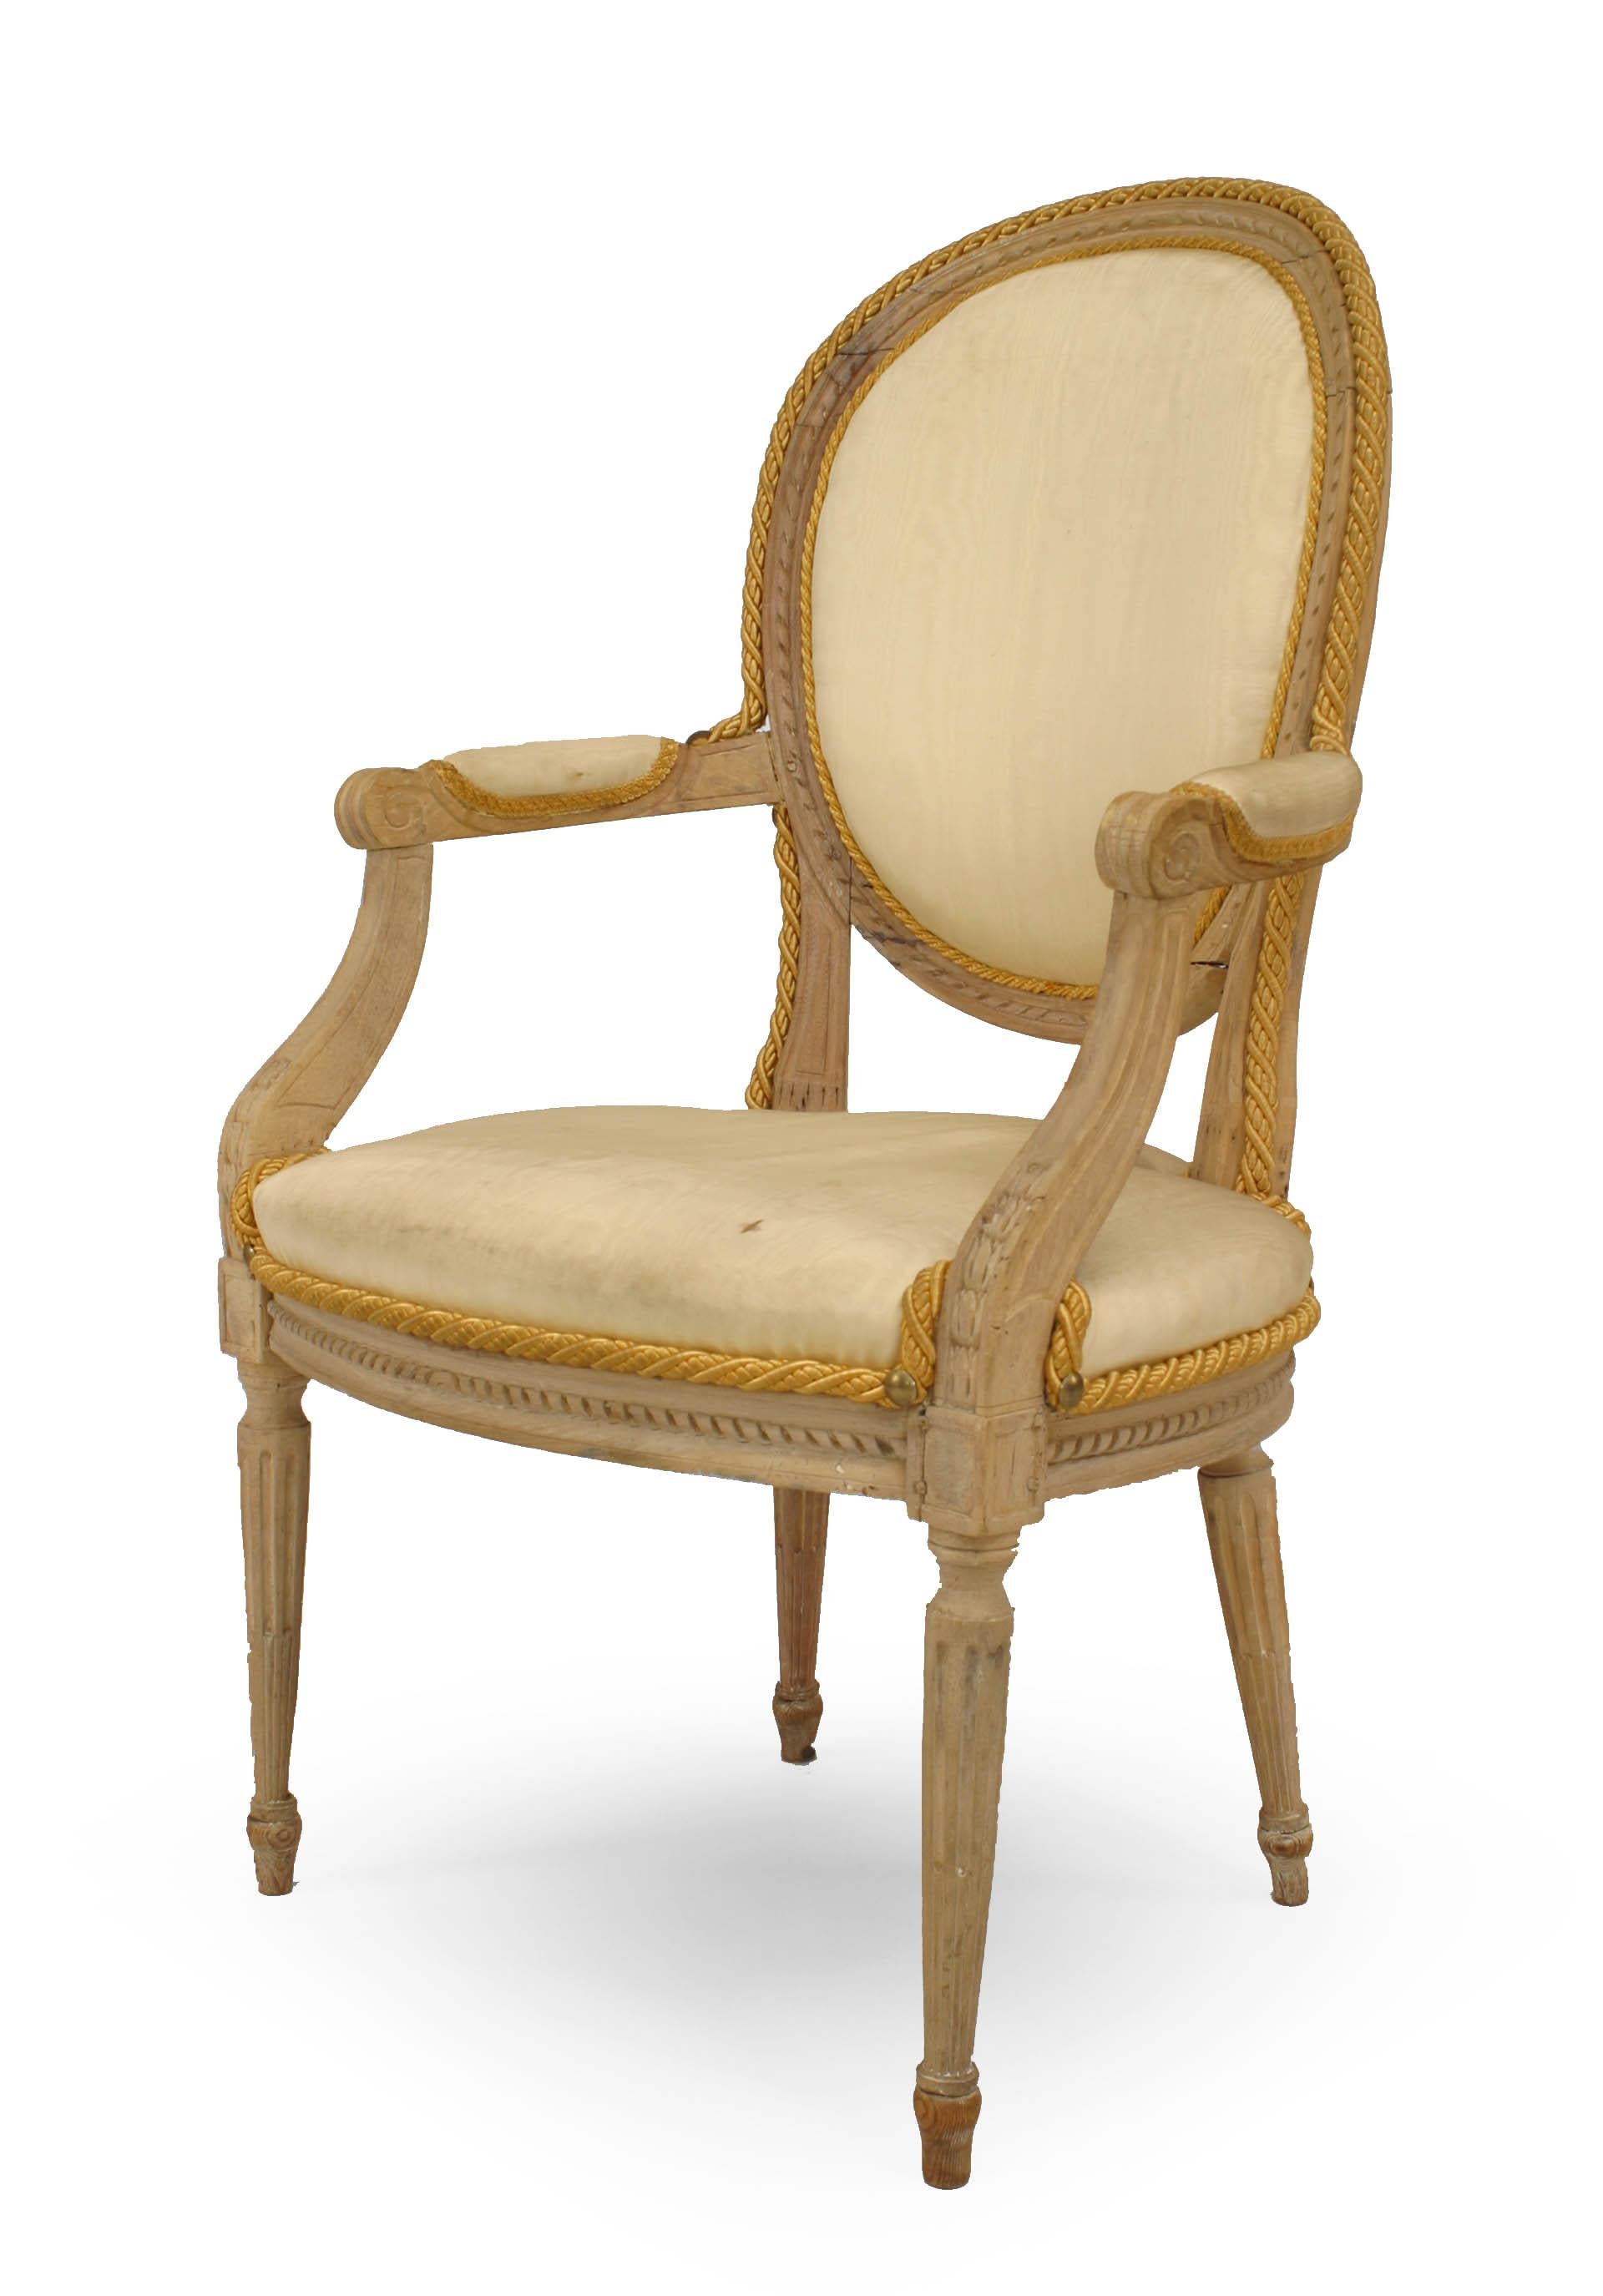 Set of 10 French Louis XVI stripped bleach dining chairs with white silk upholstered oval back & seat over fluted turned legs. 2 arm, 8 side chairs, circa 1775.